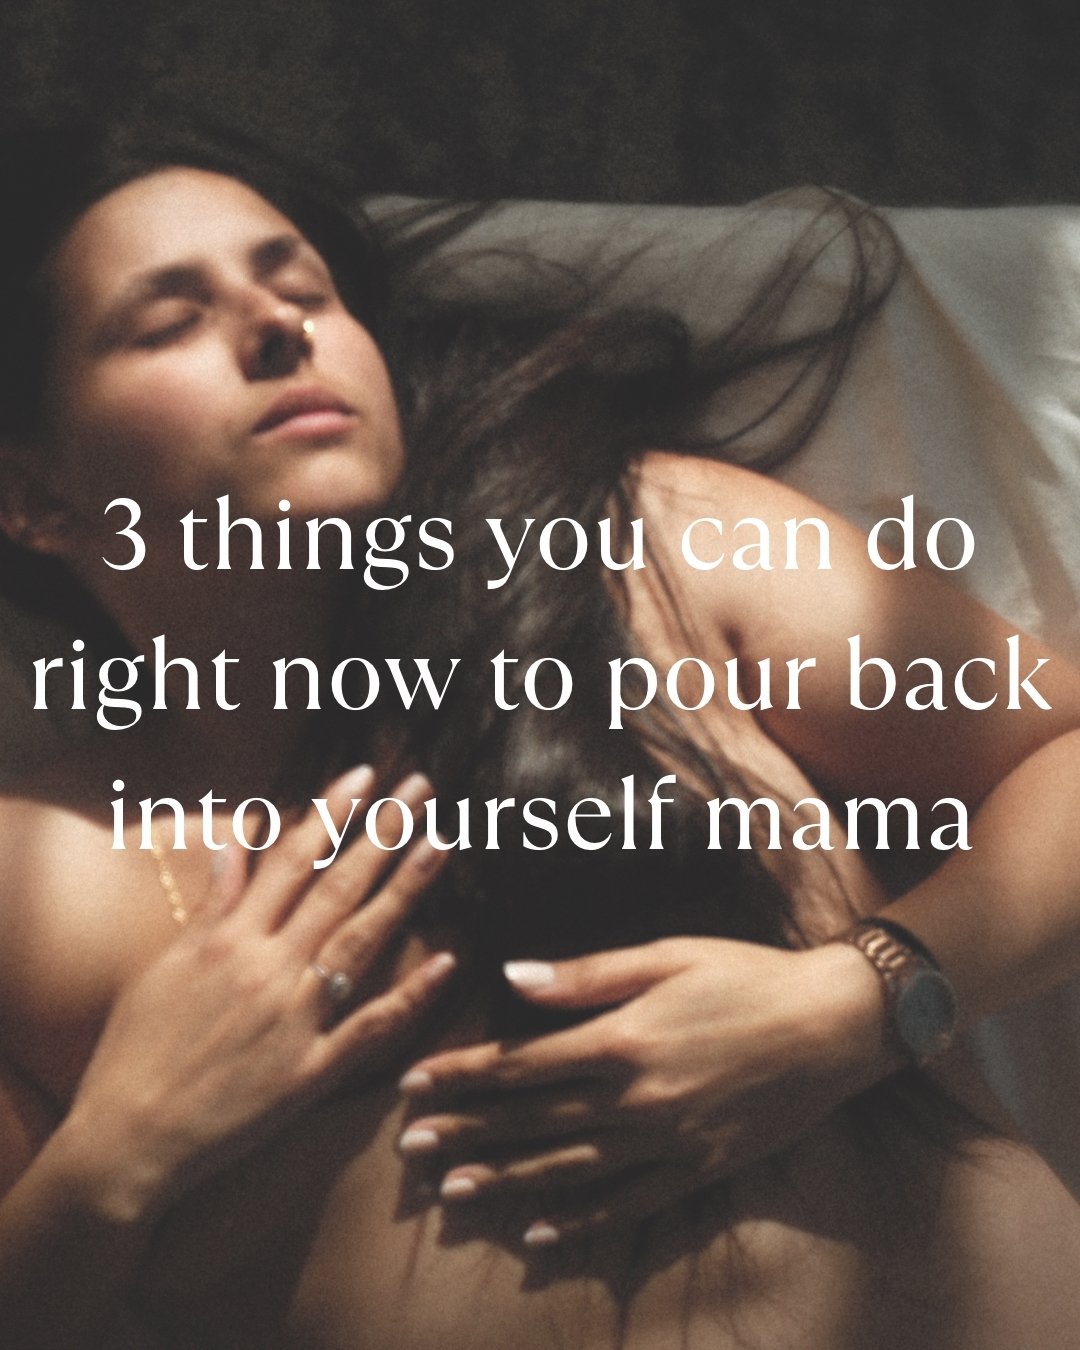 Scroll through these slides for 3 easy tips for caring for yourself as an overwhelmed mom! 

We all need mini outlets to pour into ourselves so that we can give our babies what they need to grow into self aware regulated people. 

For a more in-depth